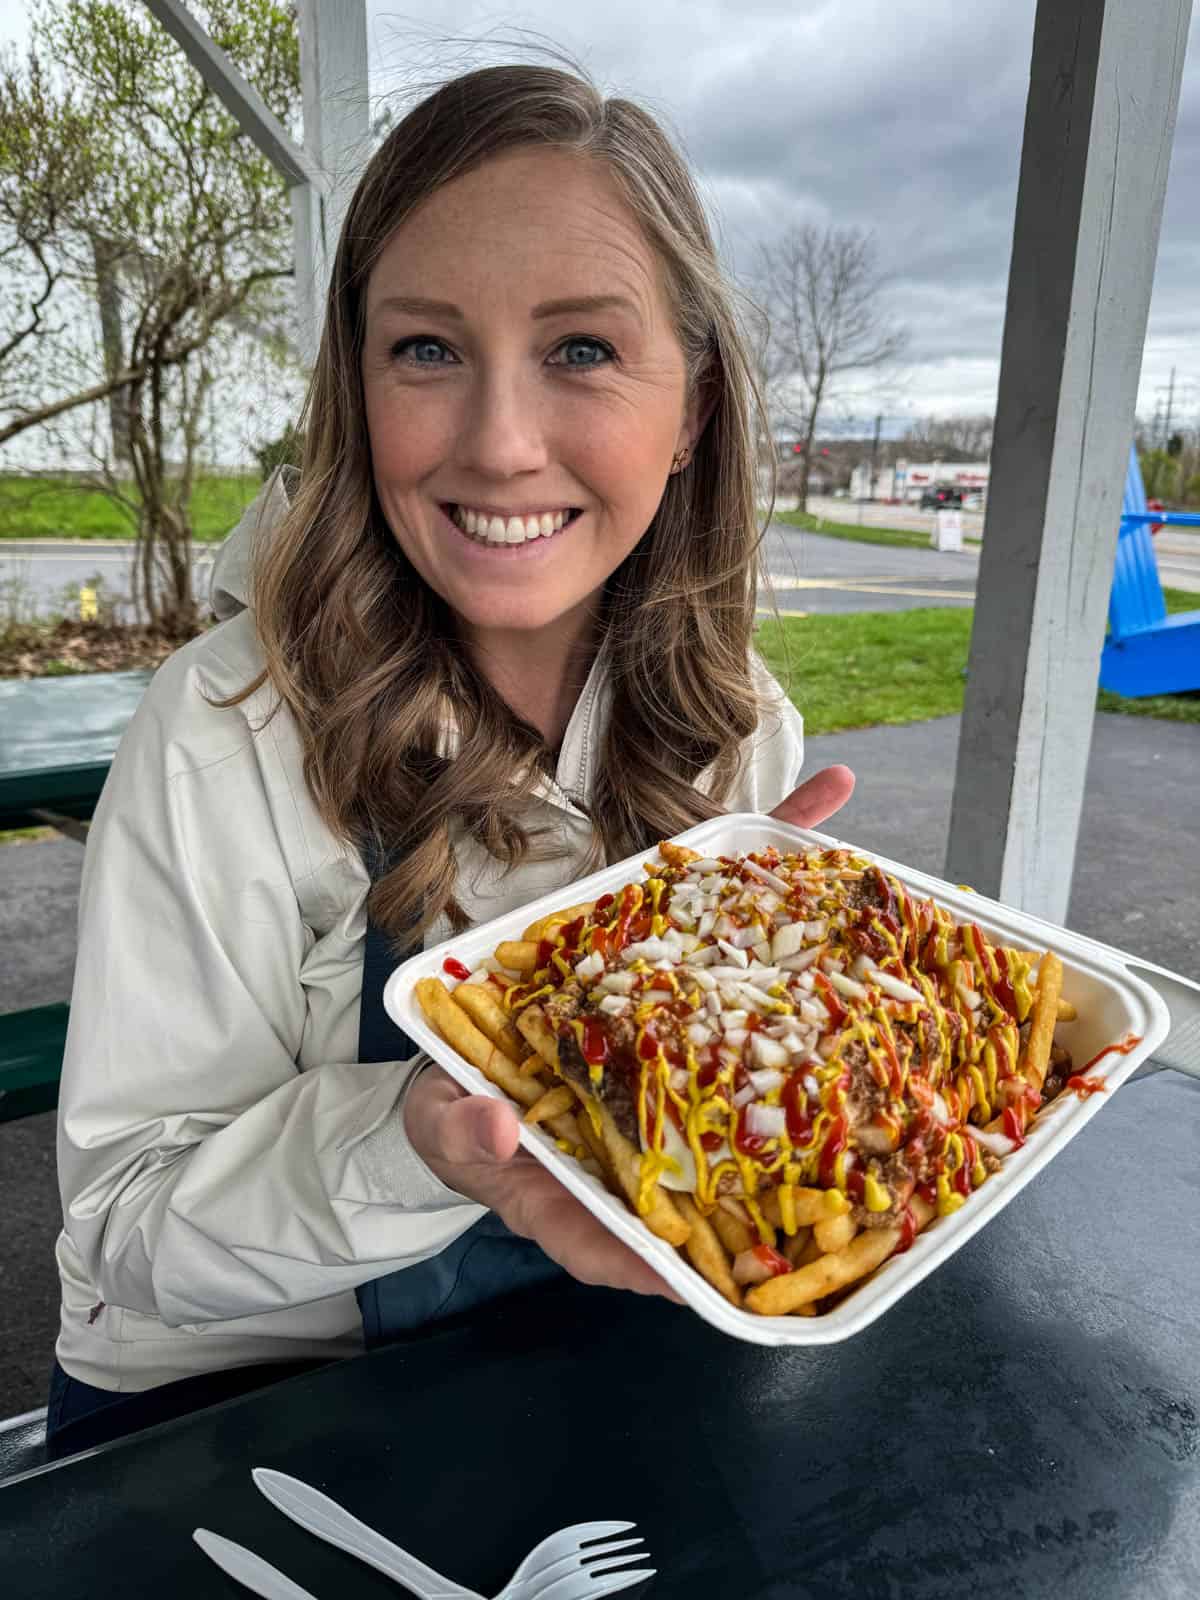 A woman holding a "garbage plate" in upstate New York near Rochester.